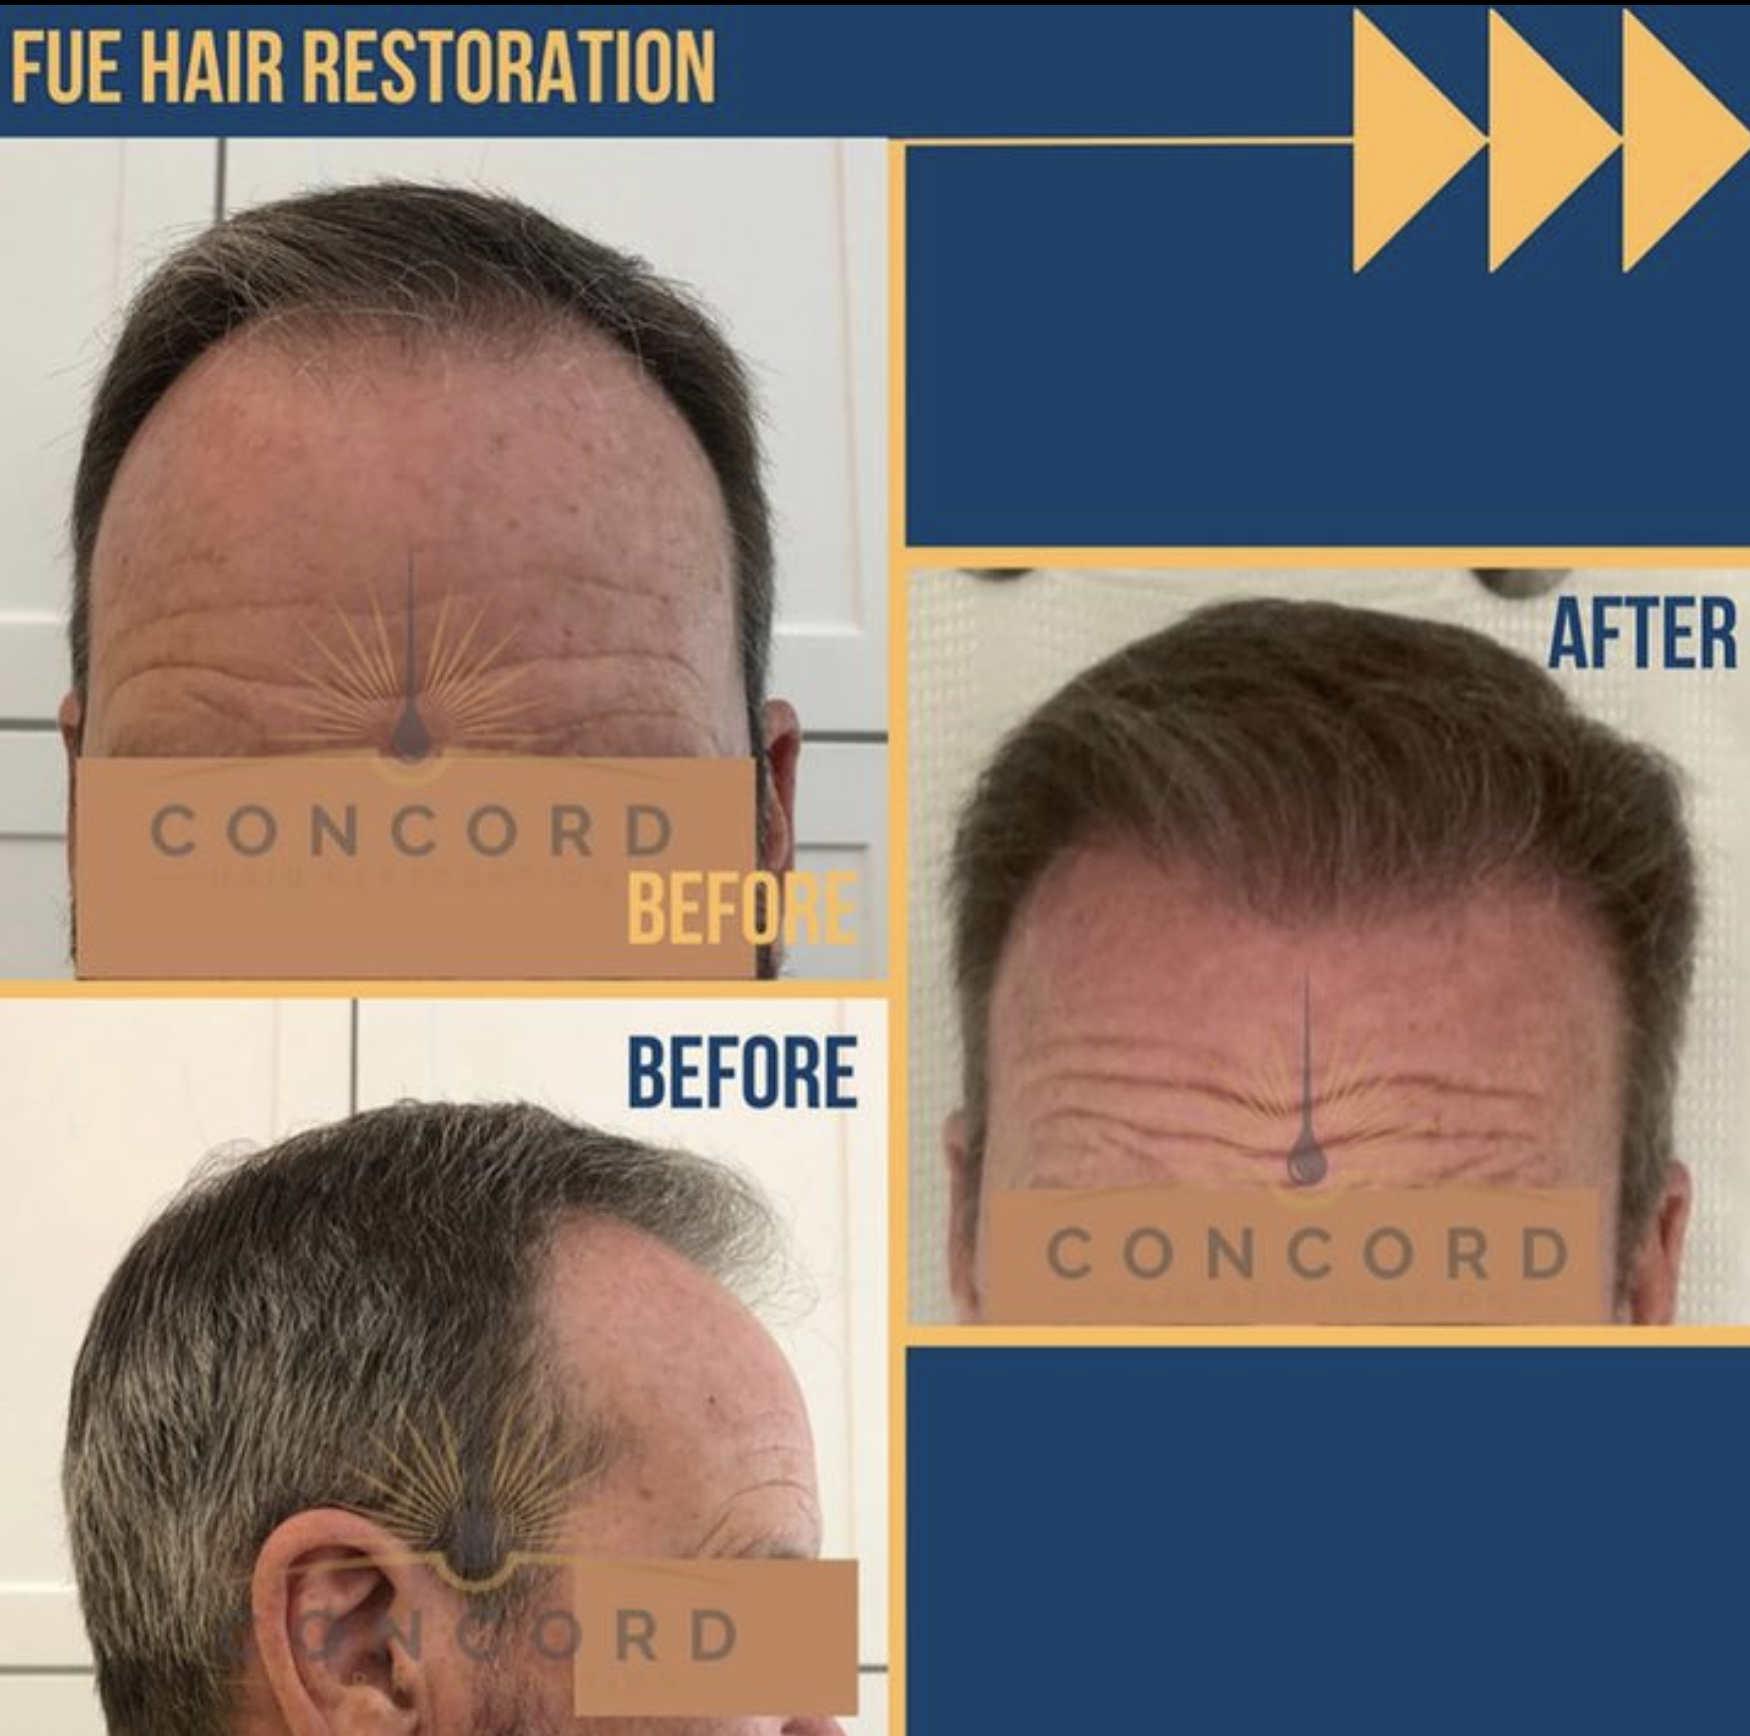 Before and after images of successful FUE hair restoration at Concord Hair Restoration, showcasing natural-looking, dense hairlines